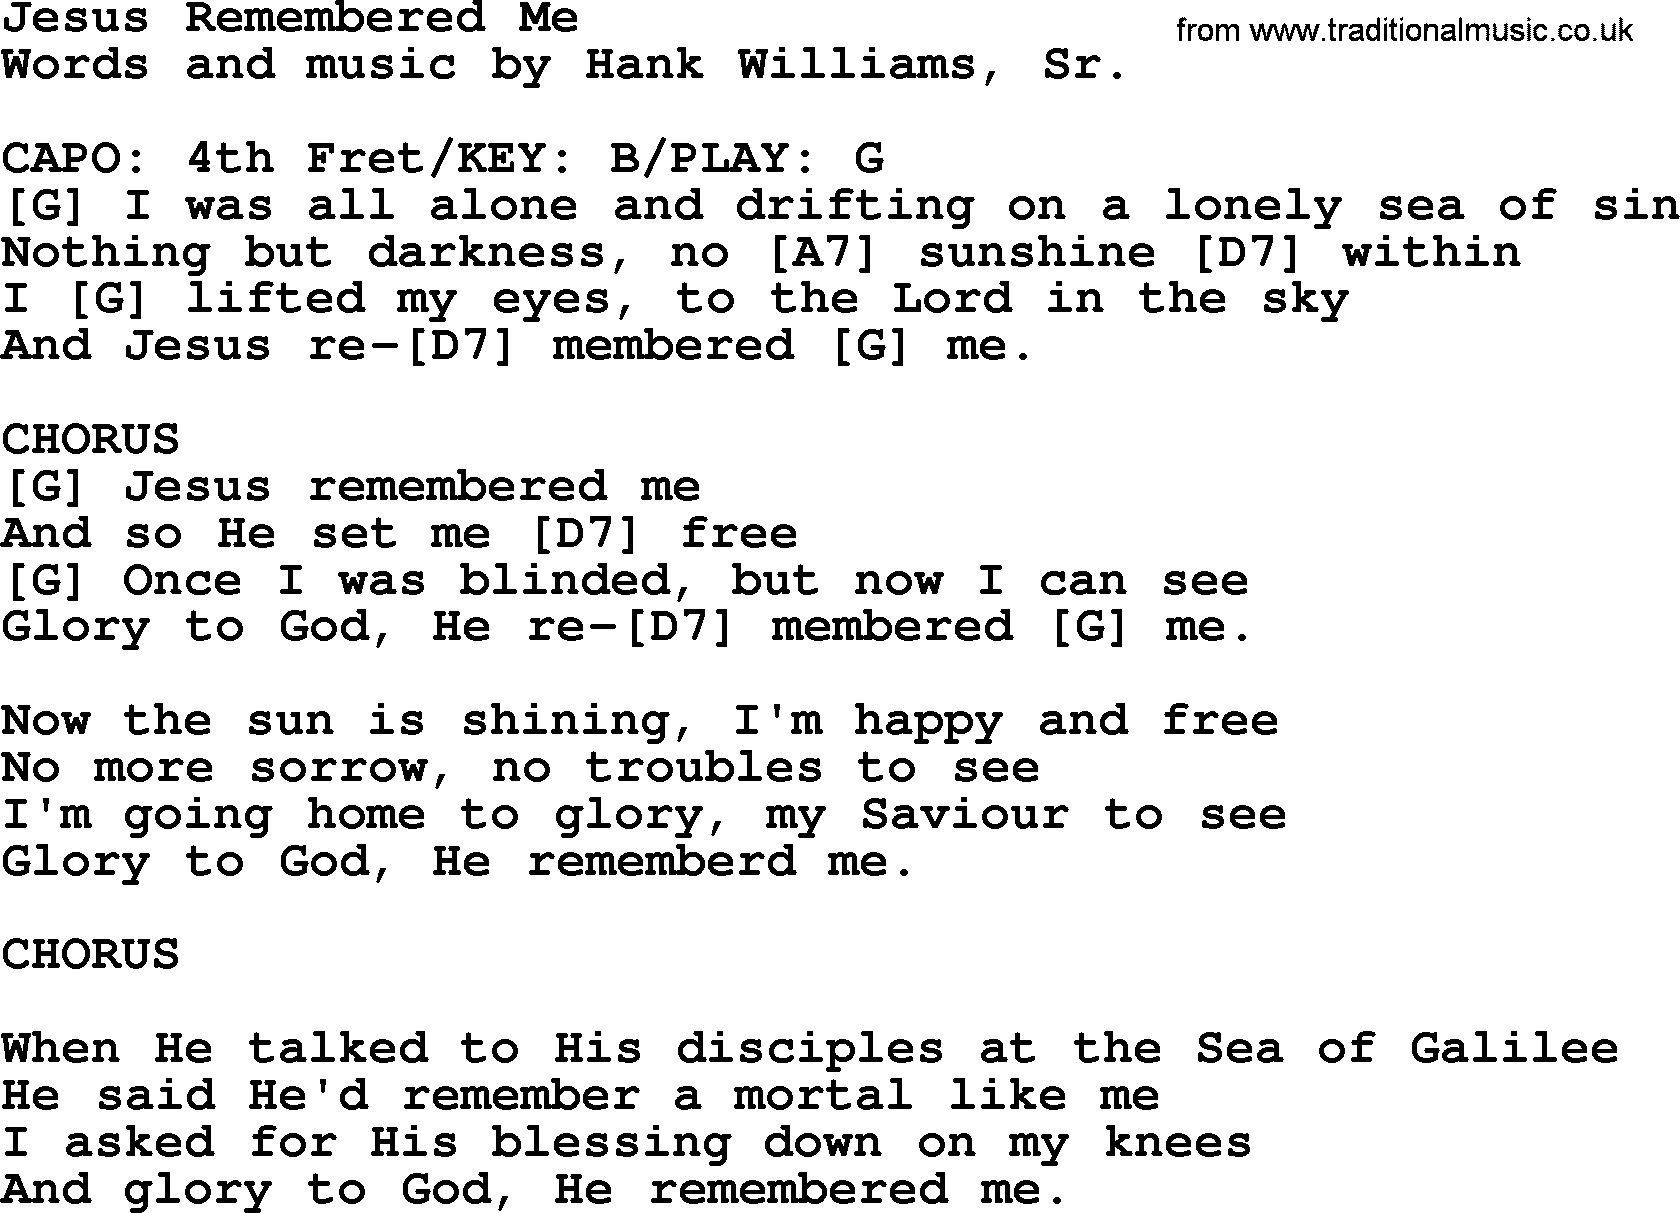 Hank Williams song Jesus Remembered Me, lyrics and chords